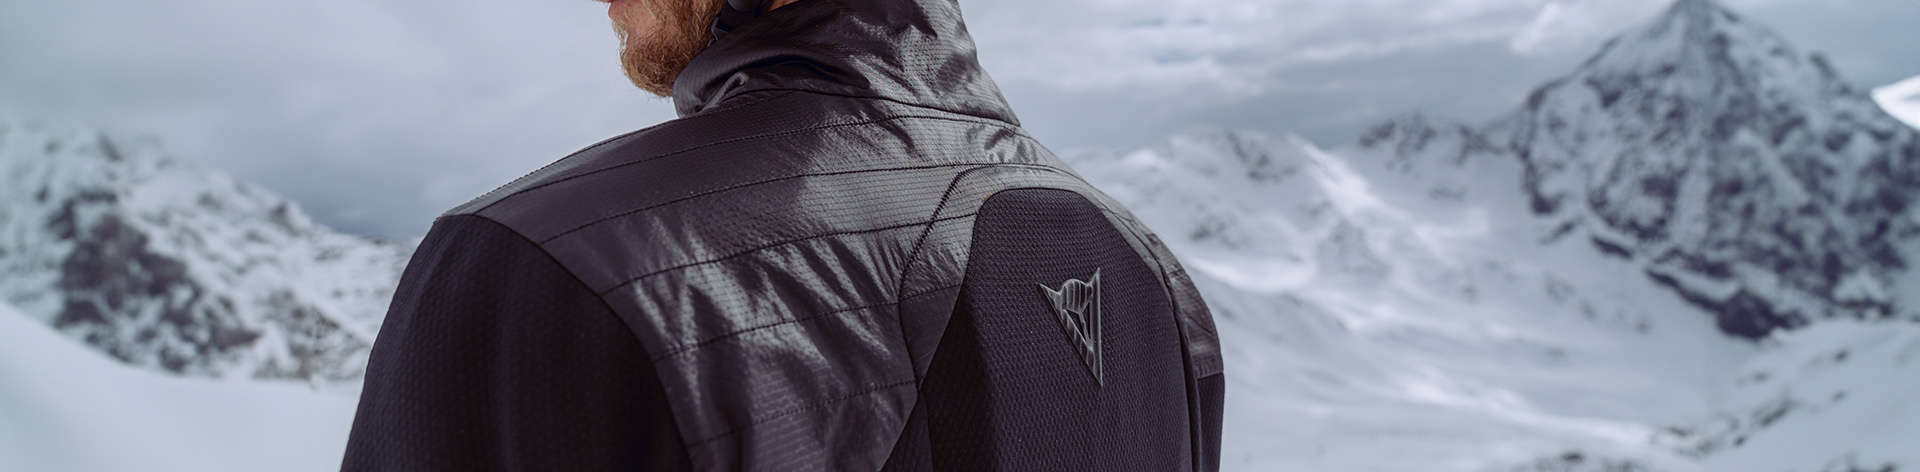 Dainese Winter Sports termical layers